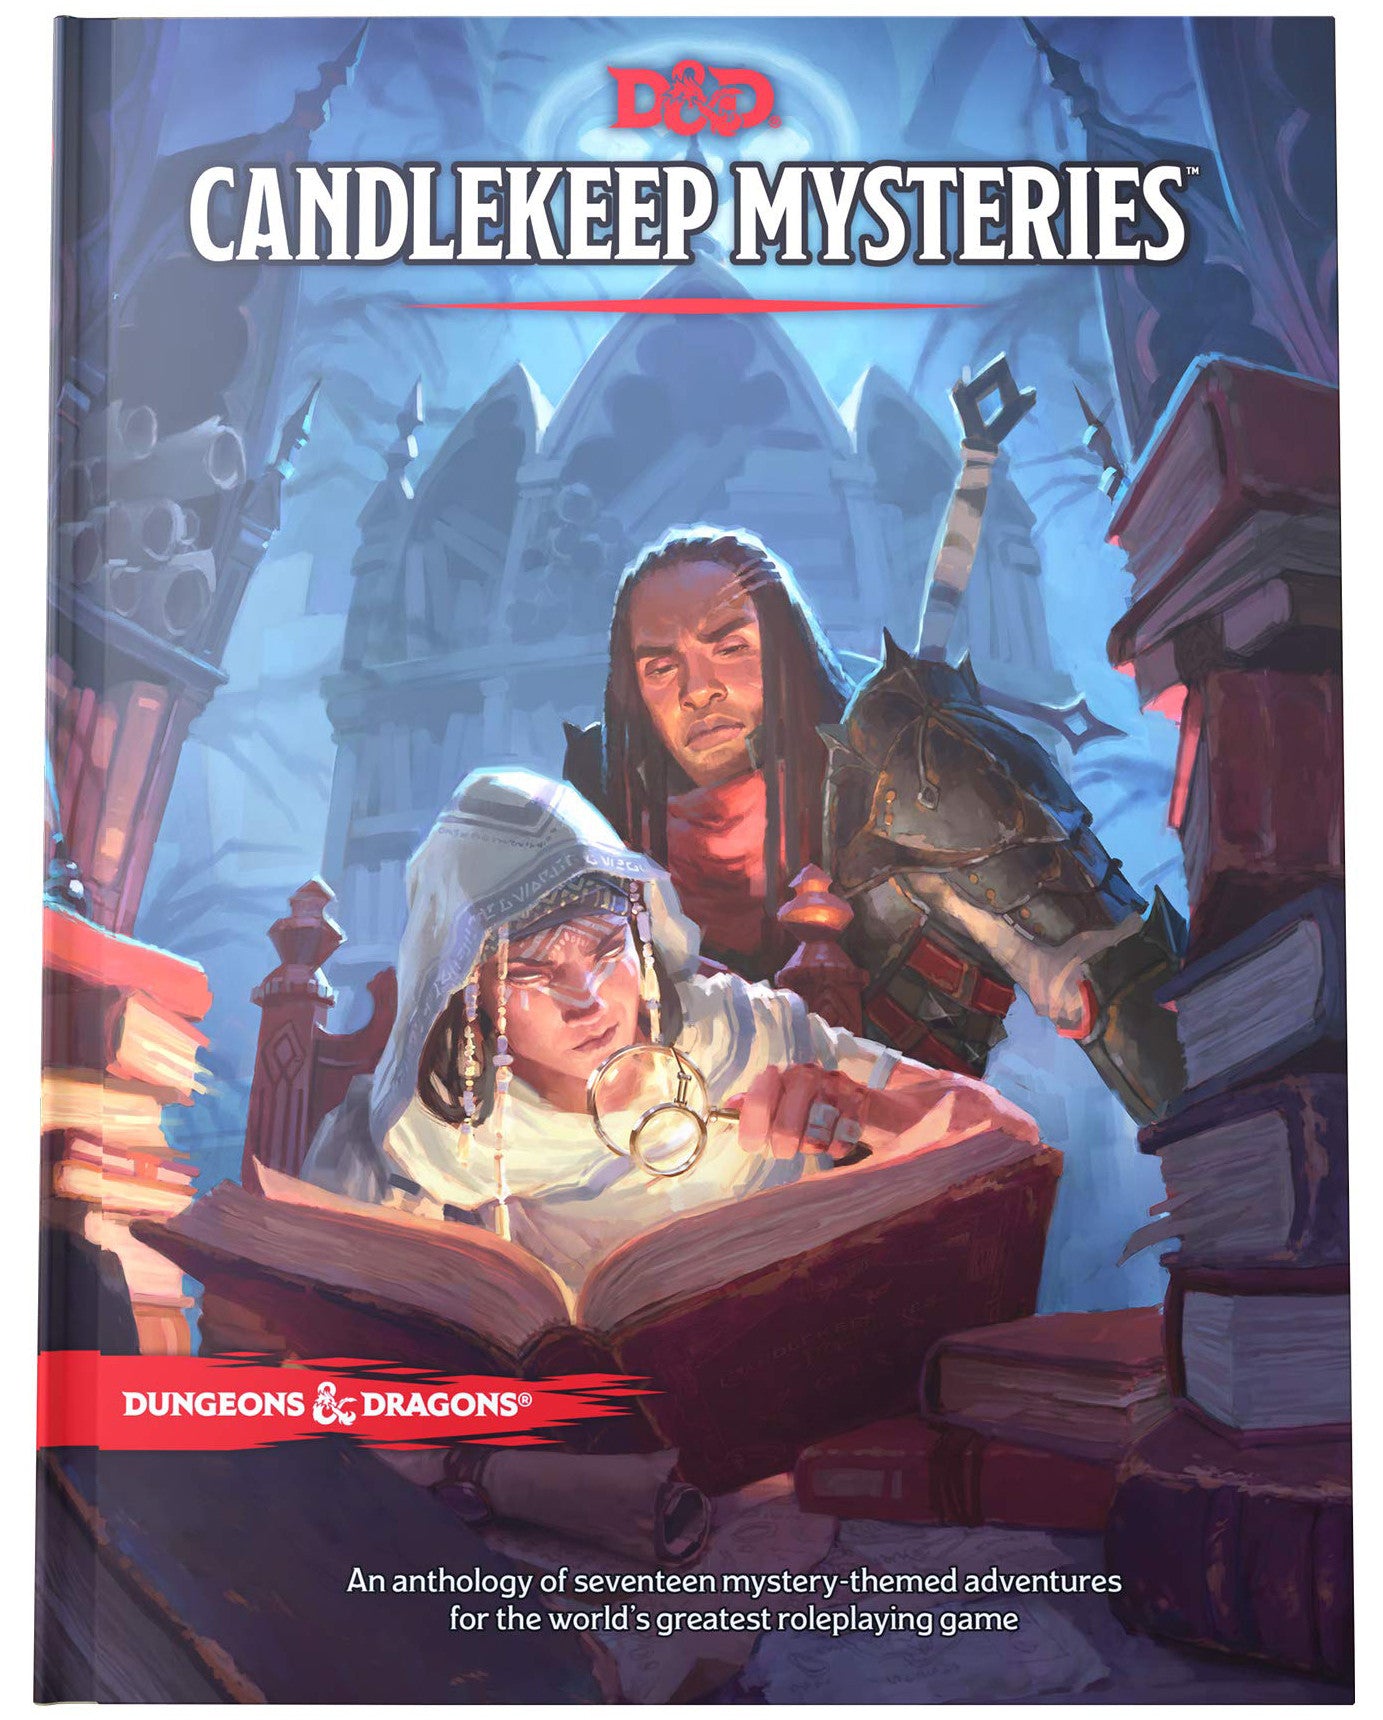 D&D Dungeons & Dragons Candlekeep Mysteries Hardcover